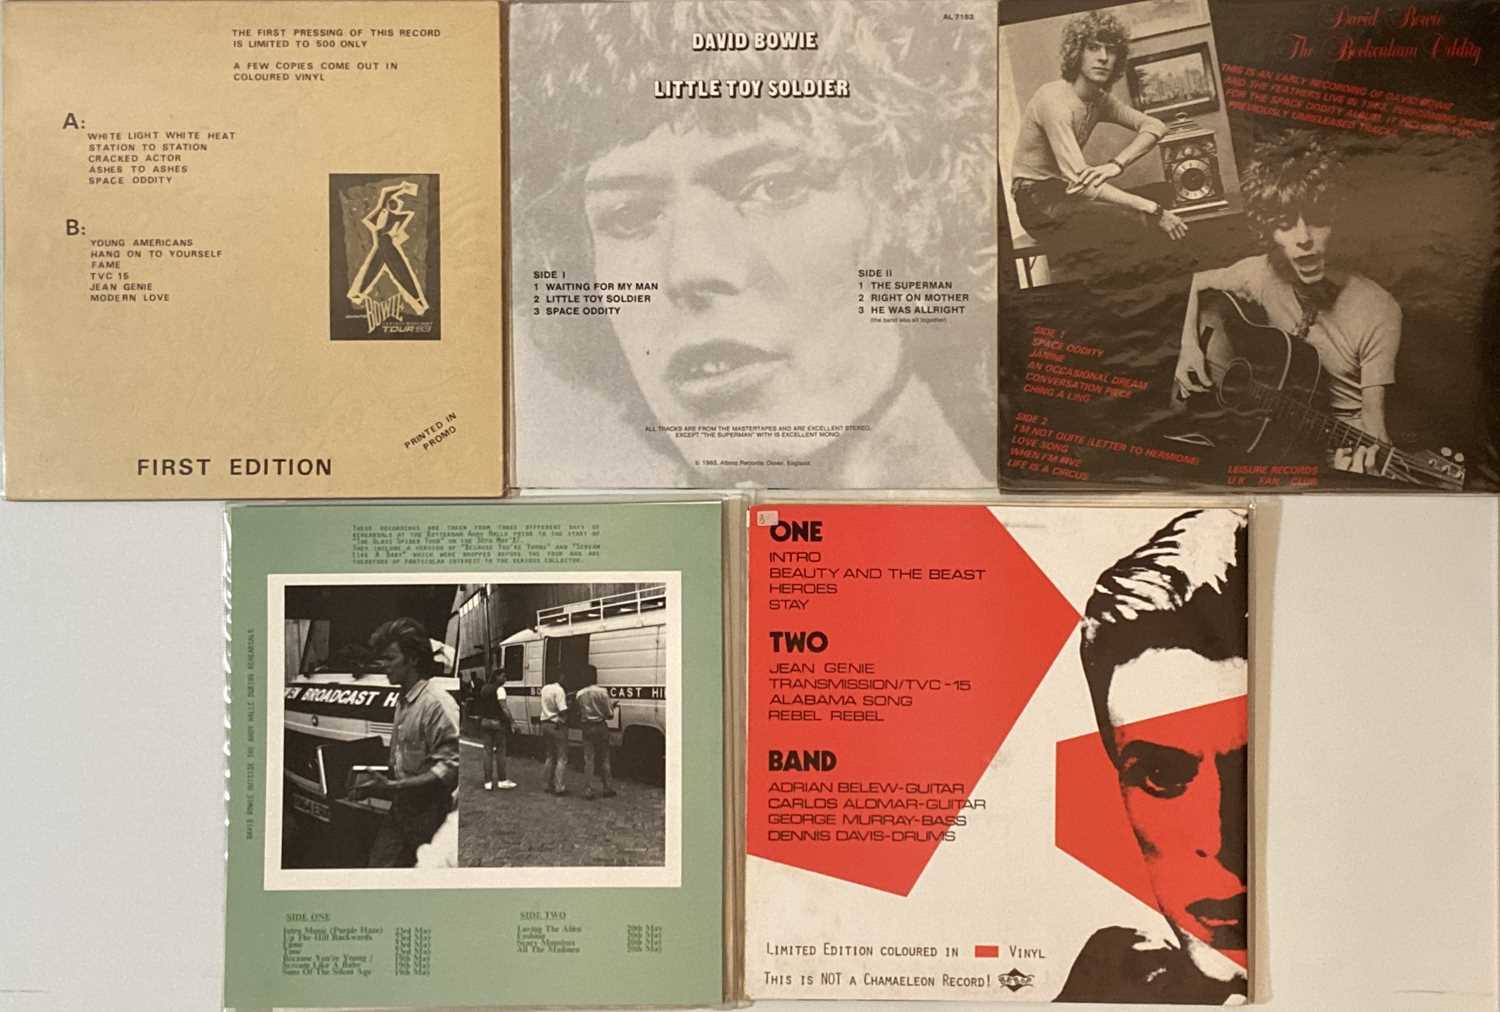 David Bowie - Private Release LPs - Image 2 of 2